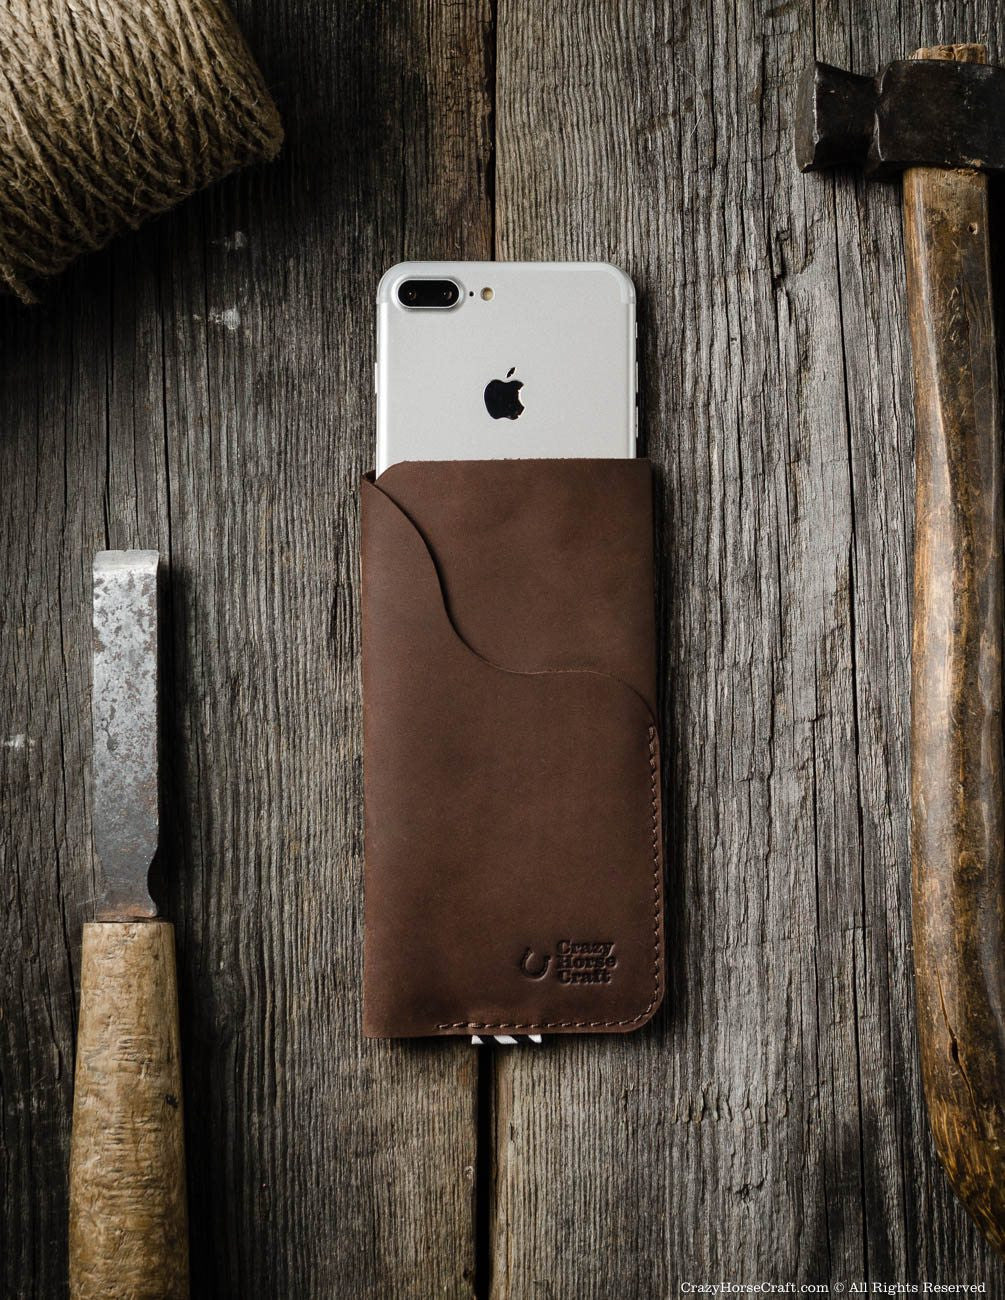 Pocket Leather Phone Case iPhone Credit Card Phone Case 